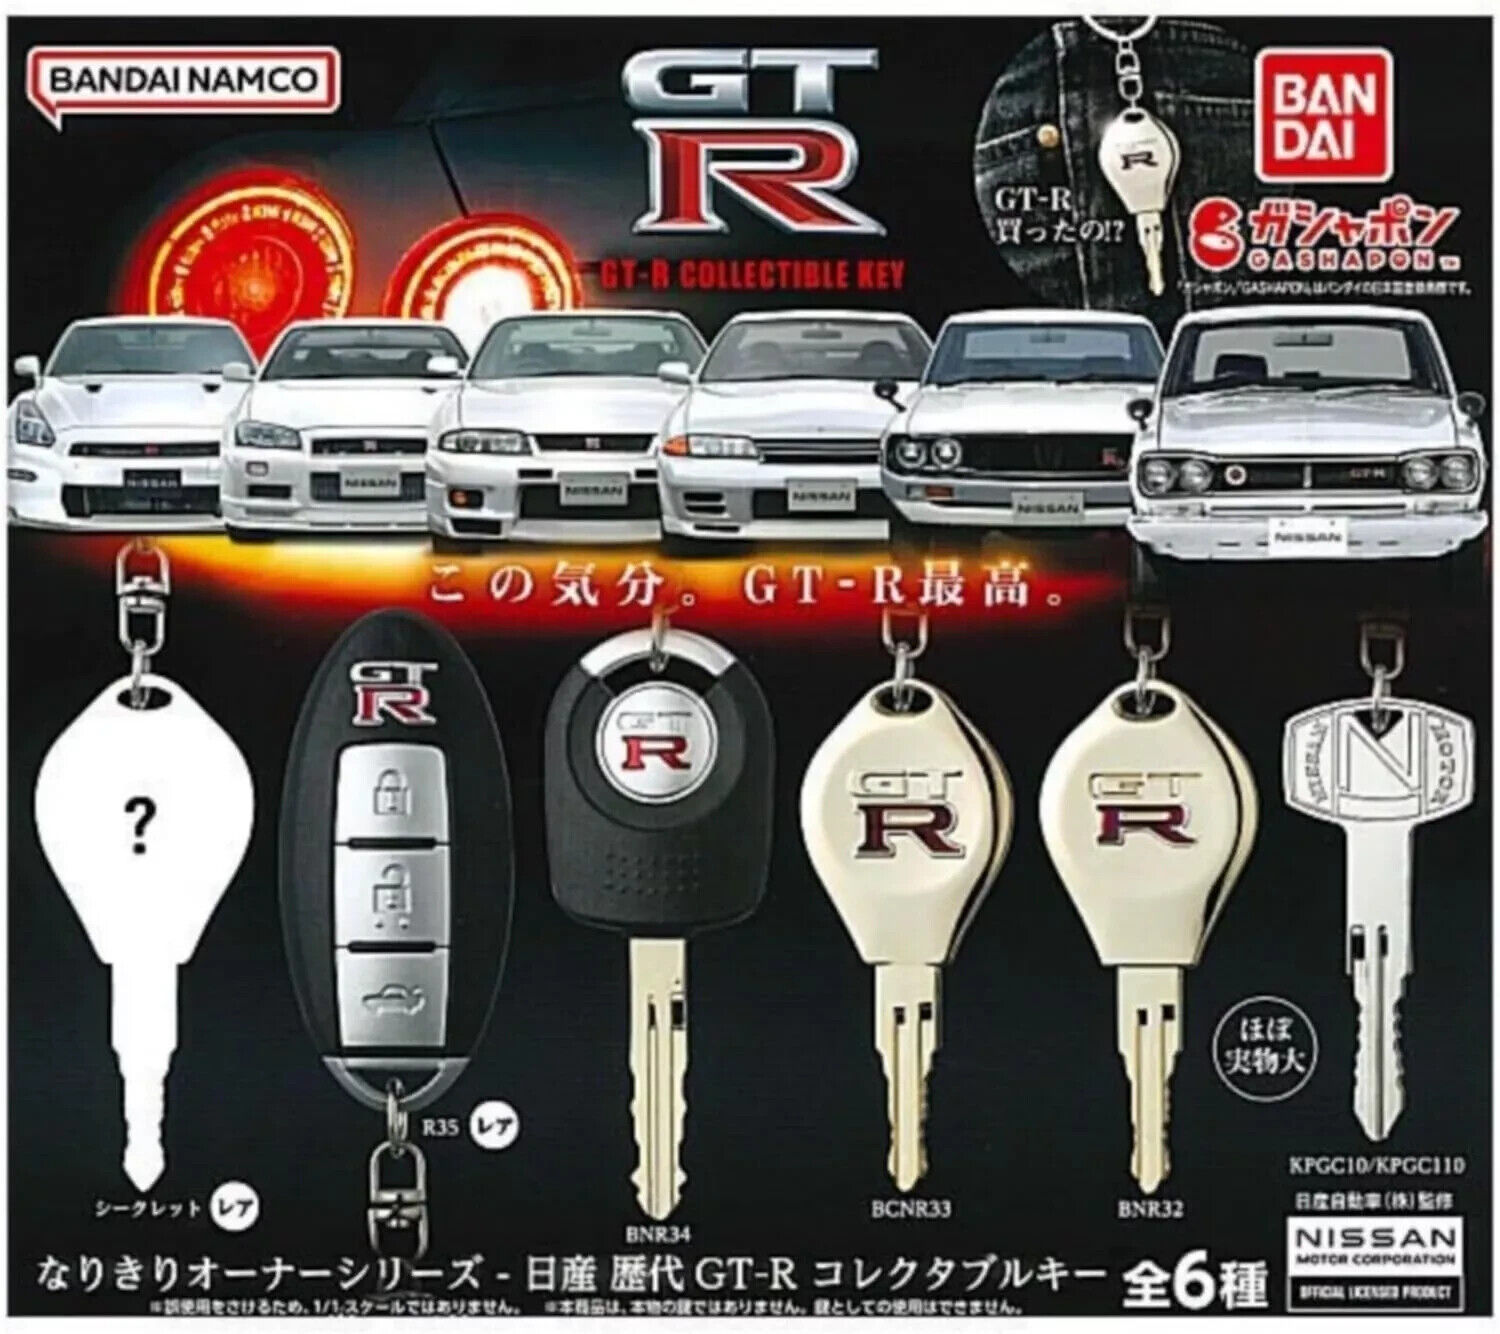 BANDAI Nissan GT-R Collectible Key 6 piece Complete Capsule Toy NEW Japan import